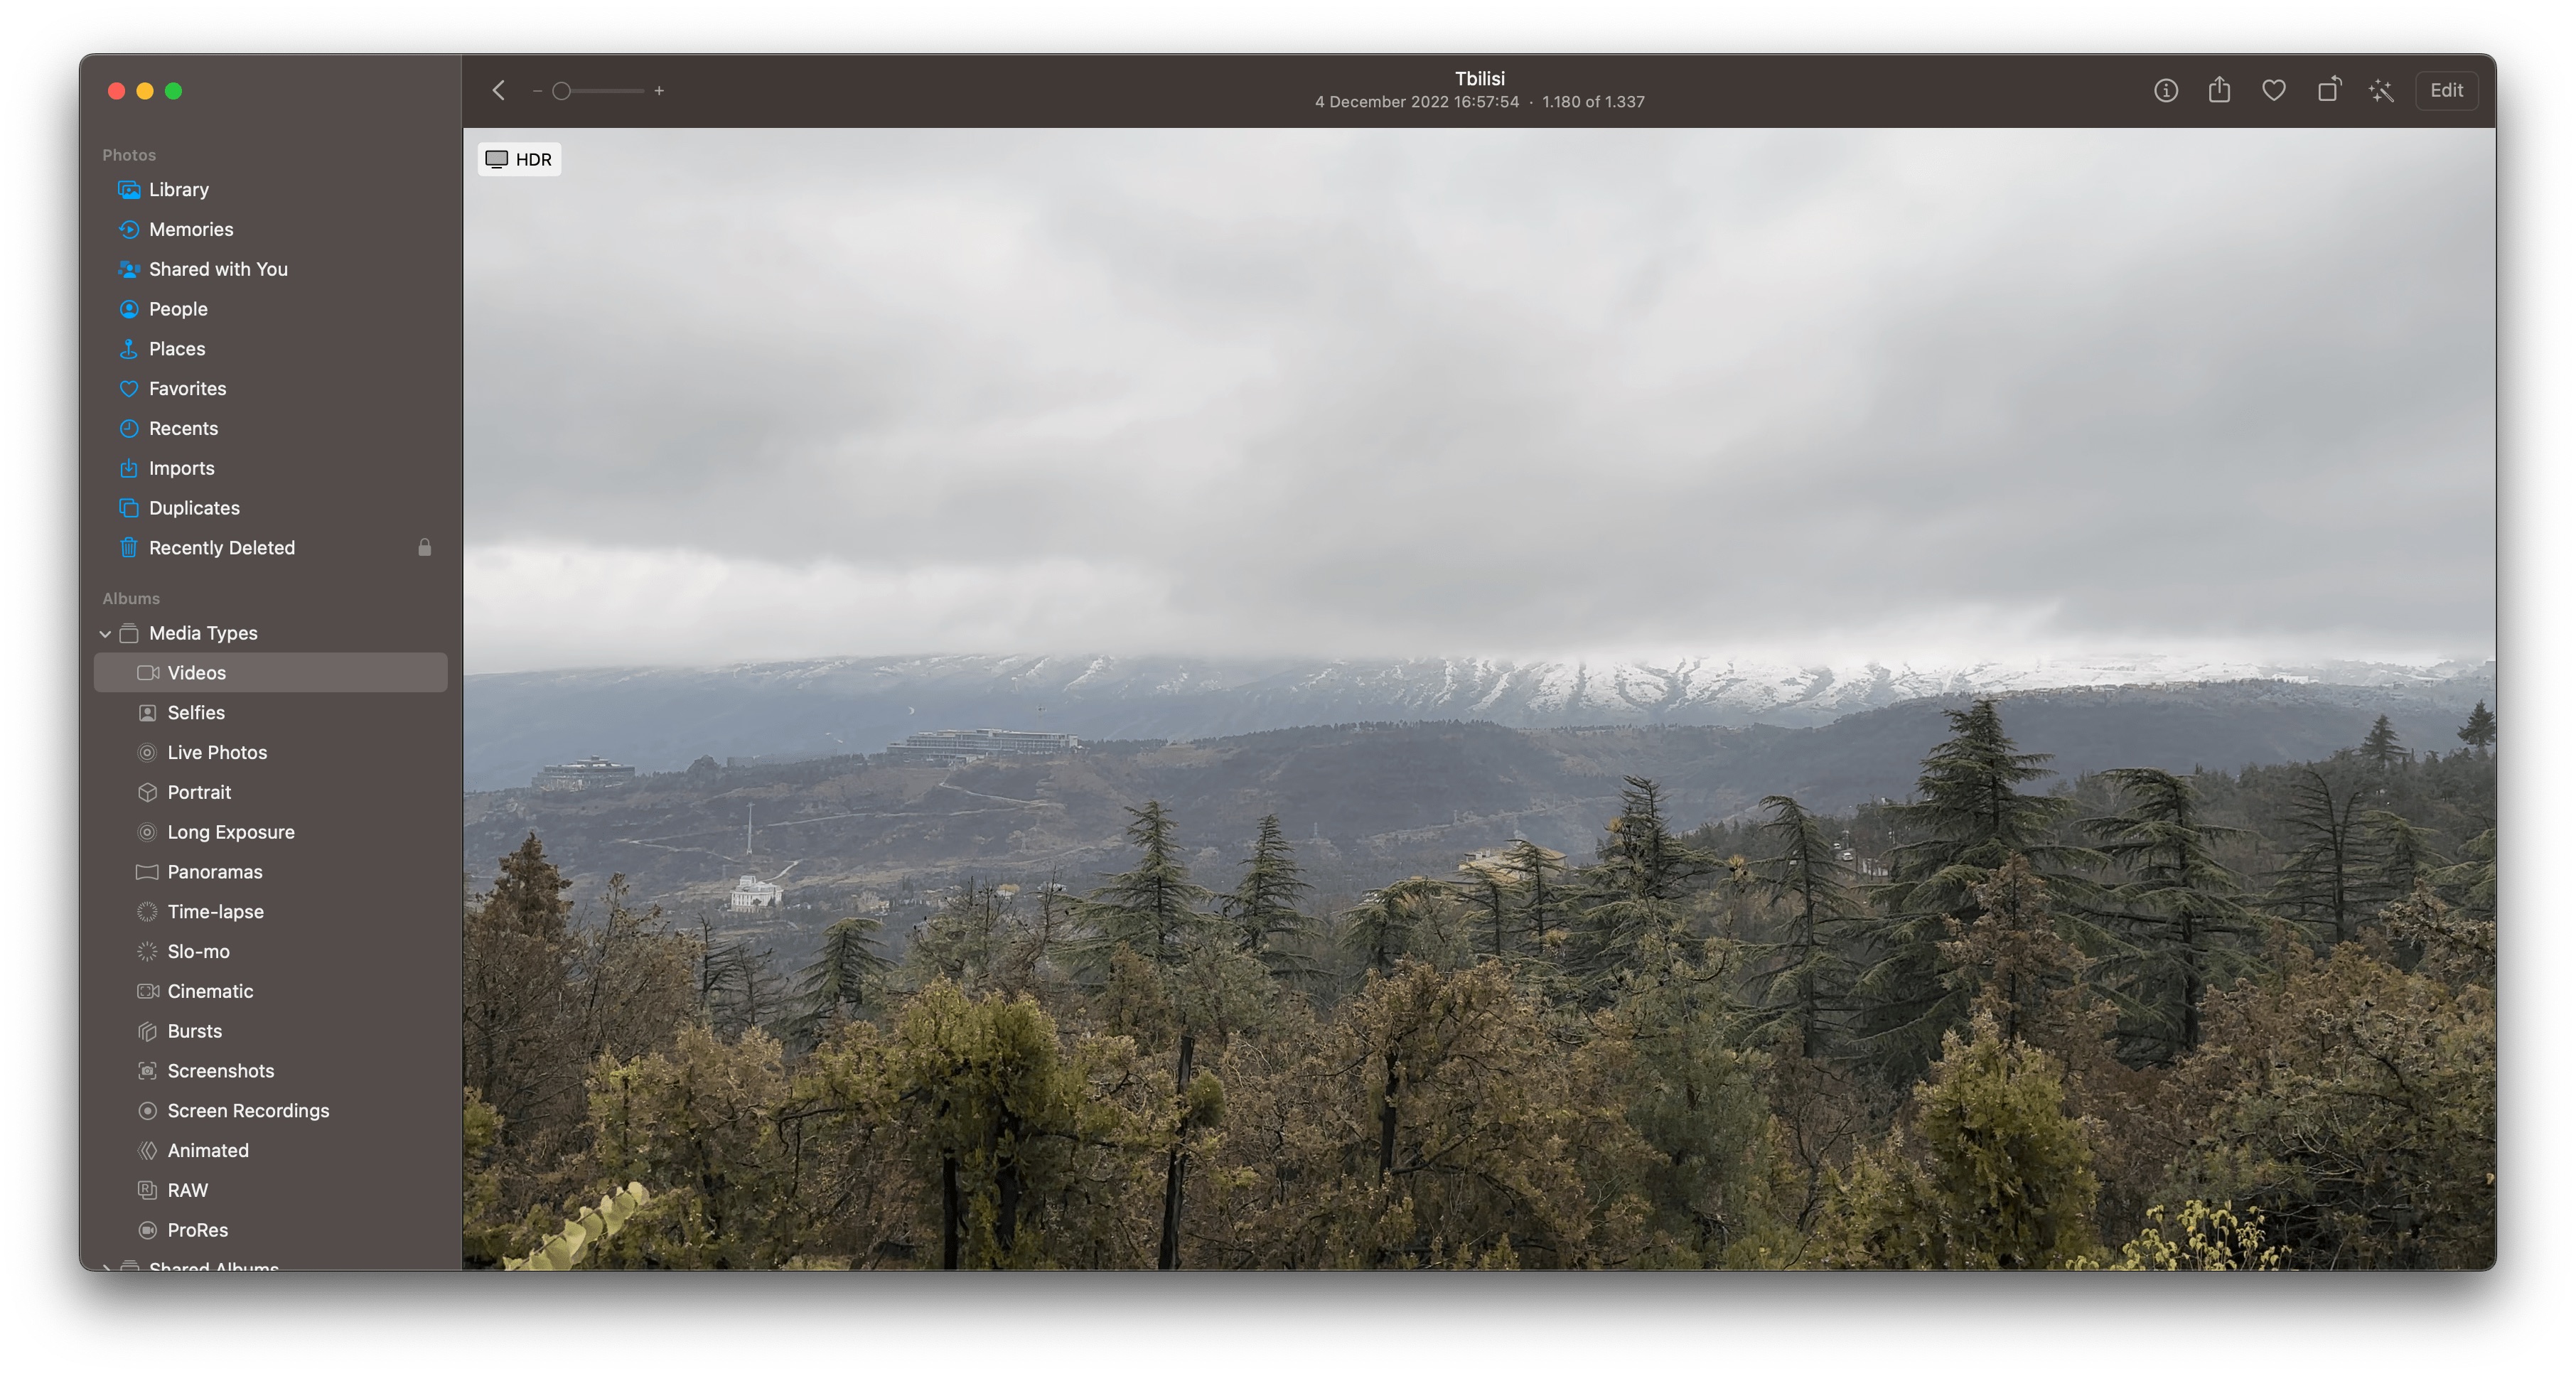 Seeing low quality previews in iCloud Photos? Here's how to get the full resolution media